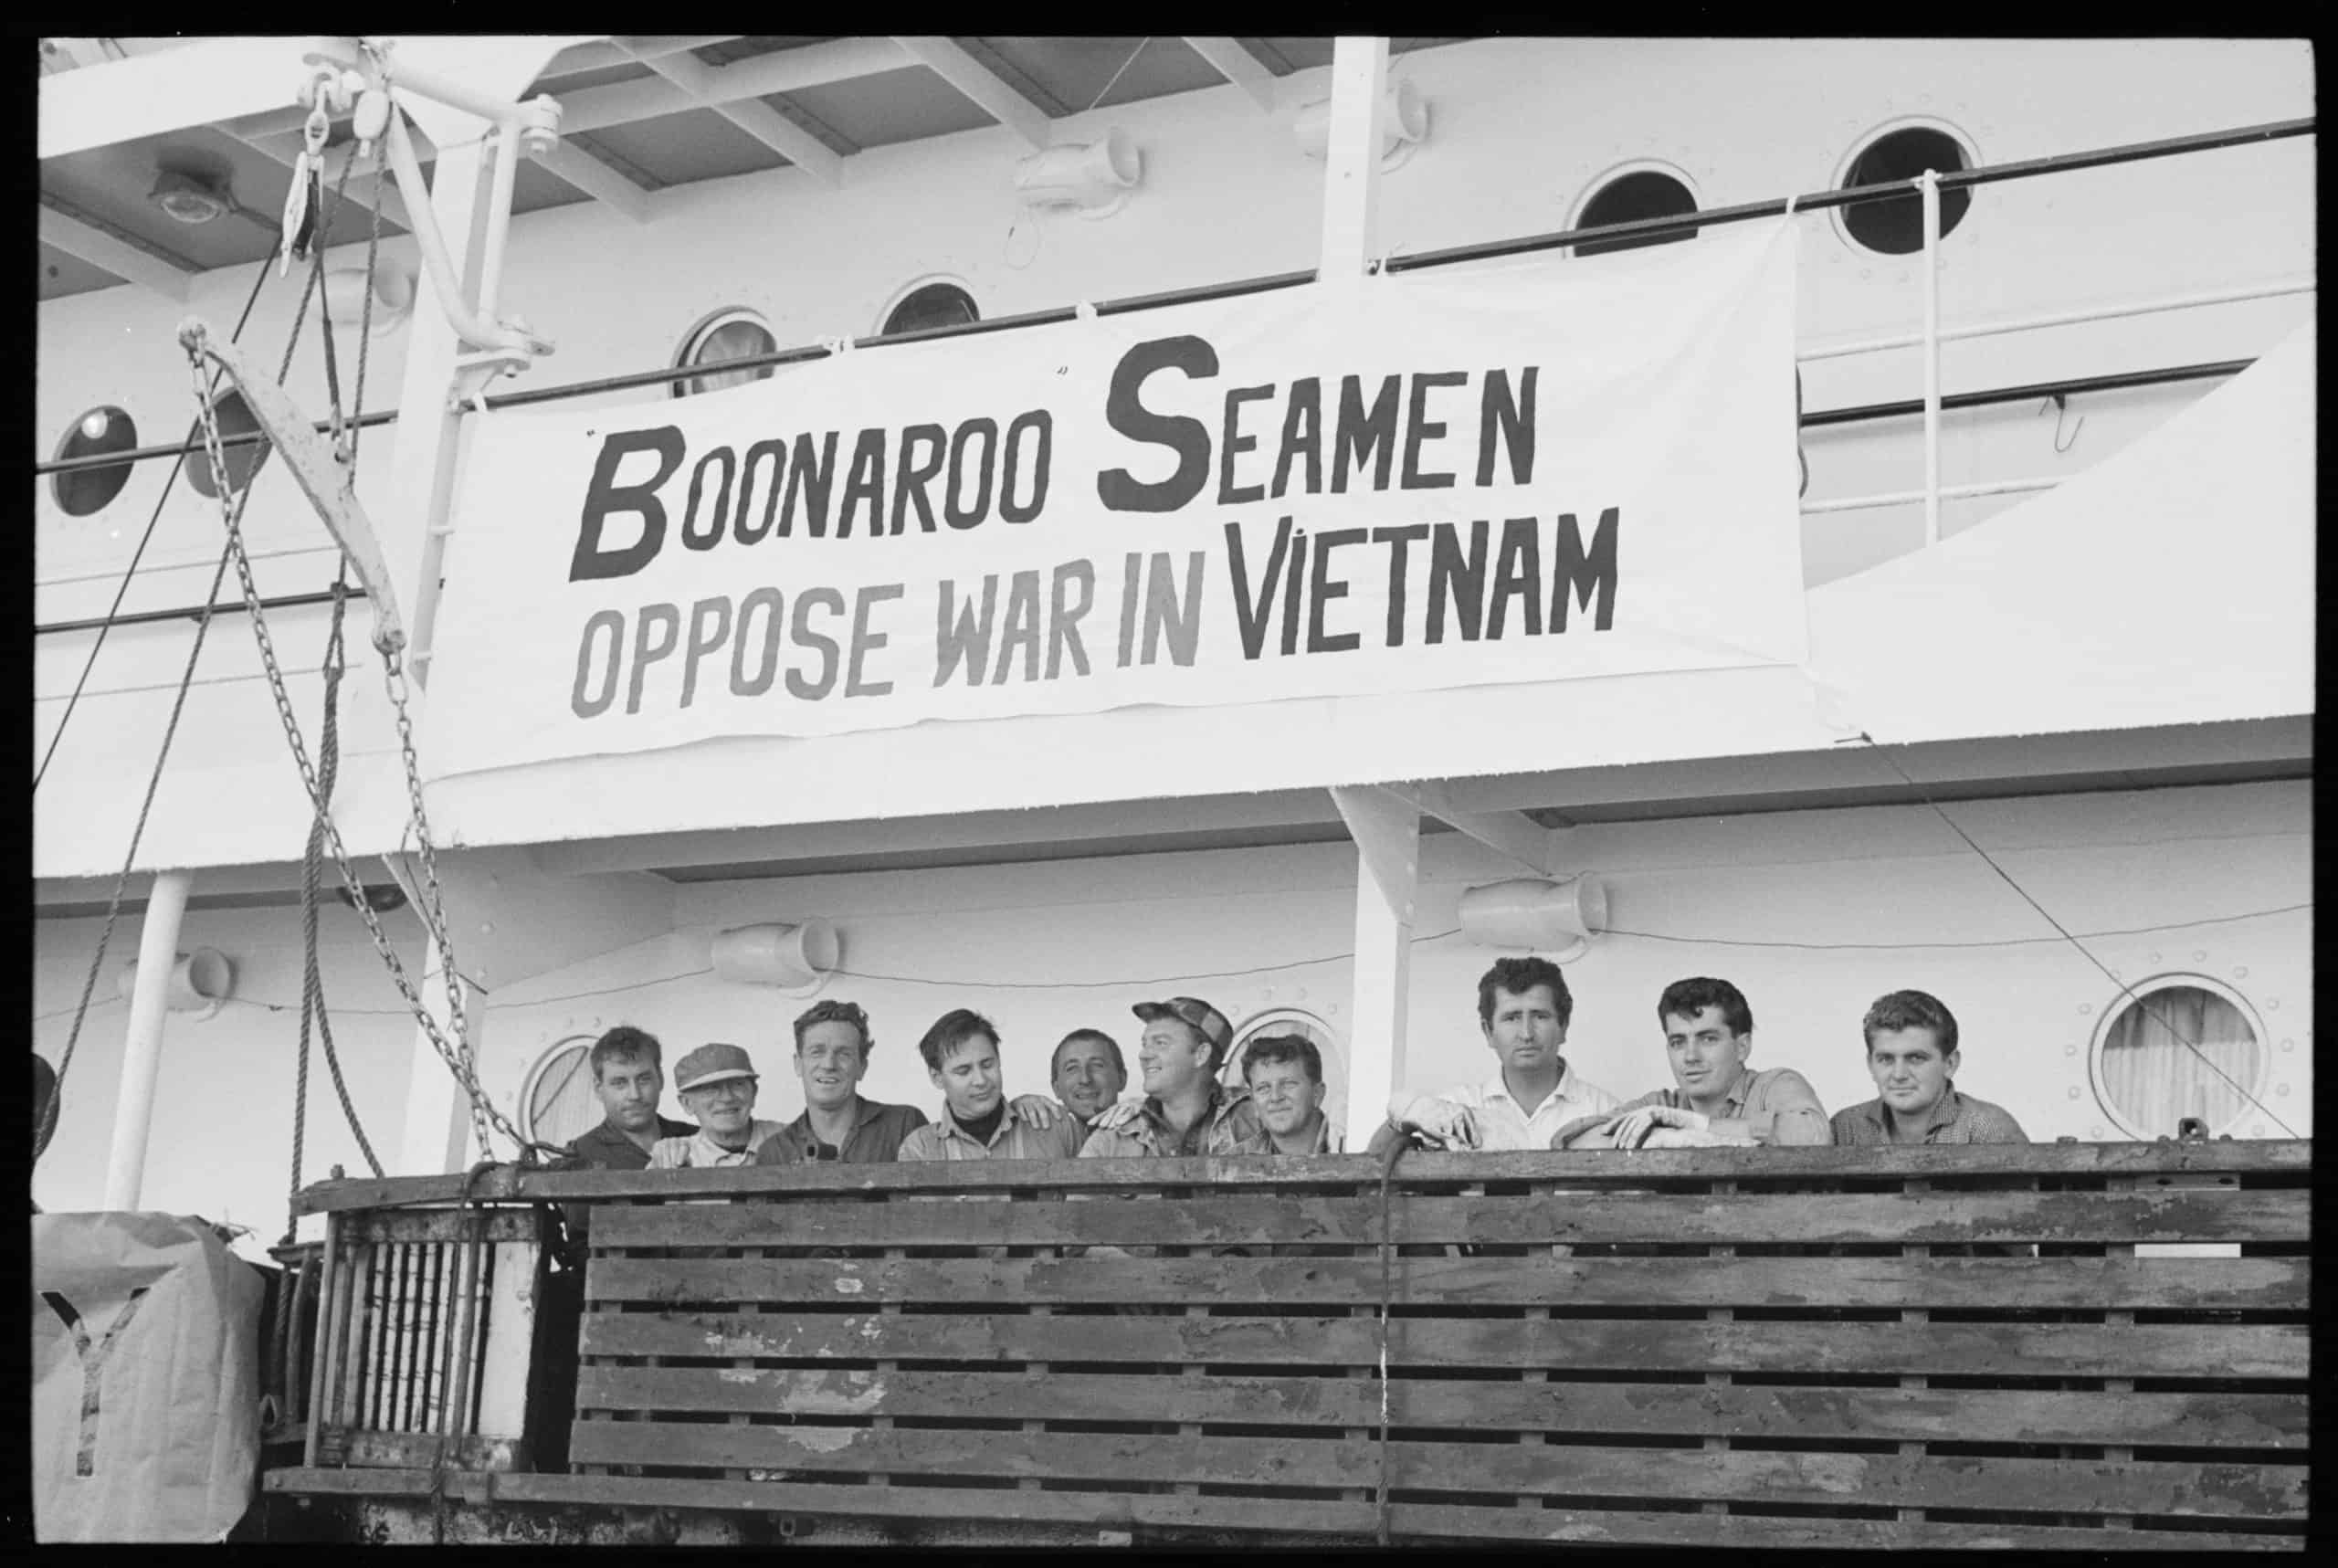 A group of men standing at ship's railing with banner above their heads that reads Boonaroo Seamen Oppose War in Vietnam